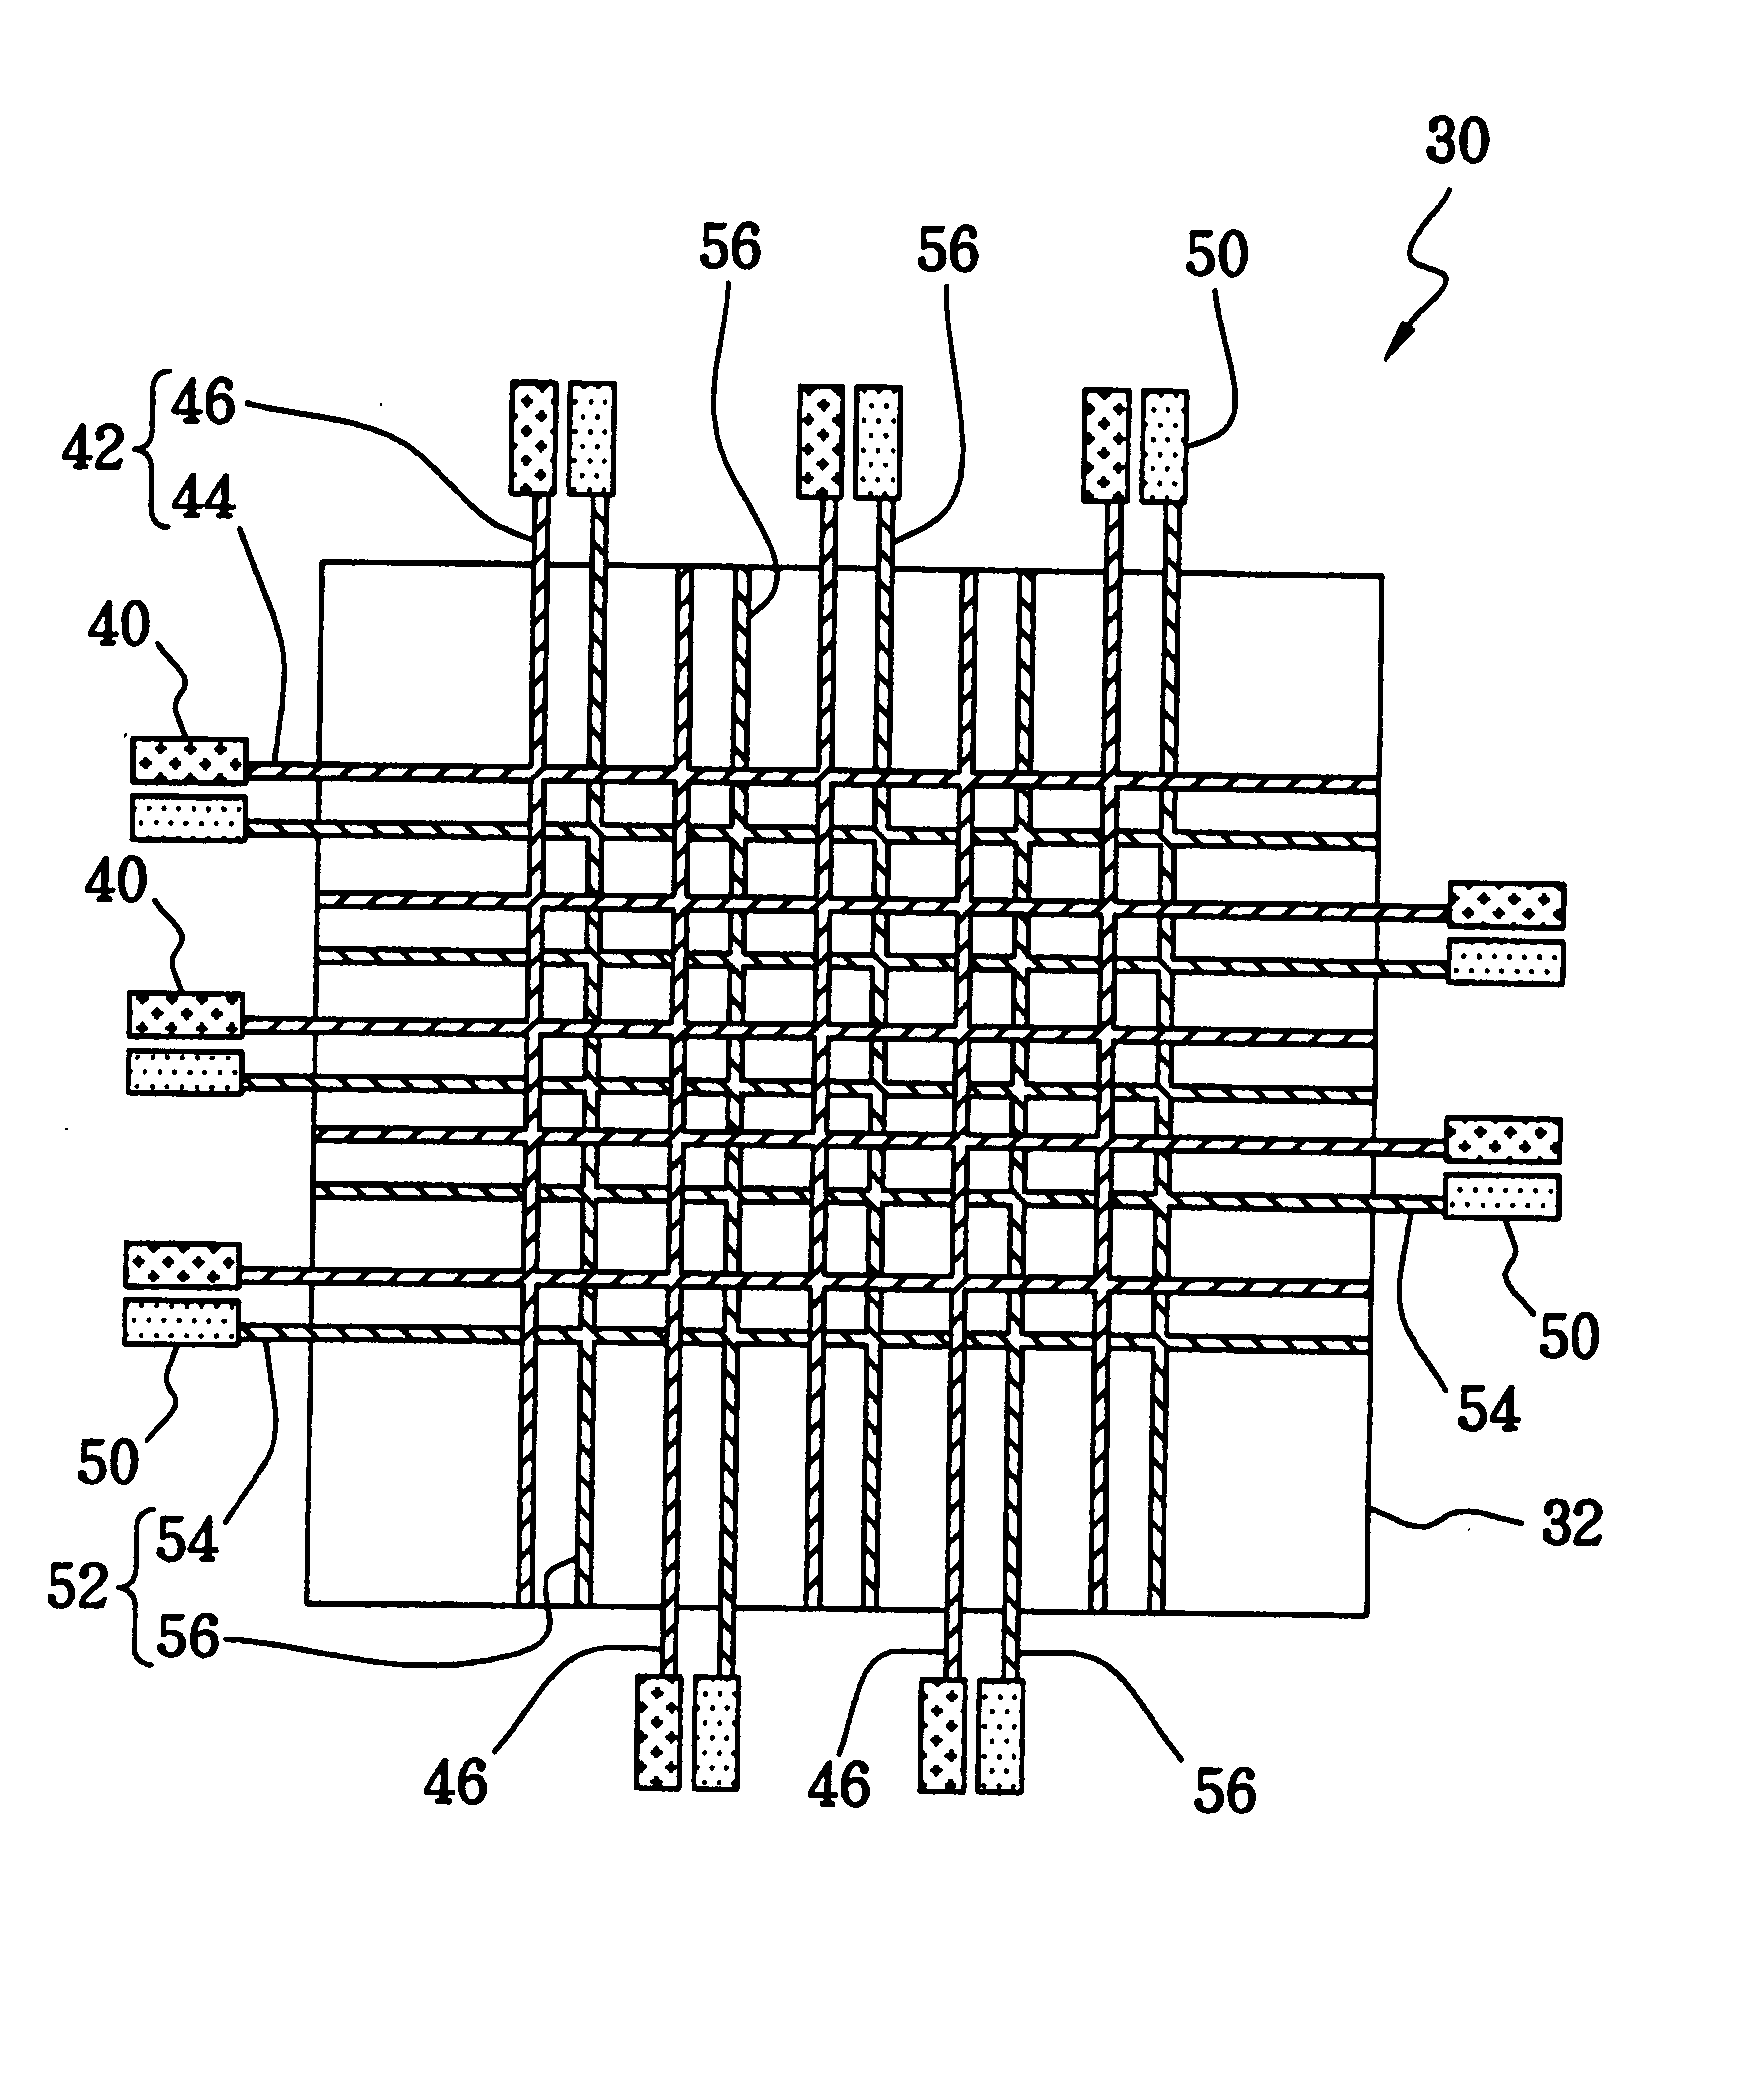 Power supply layout for an integrated circuit